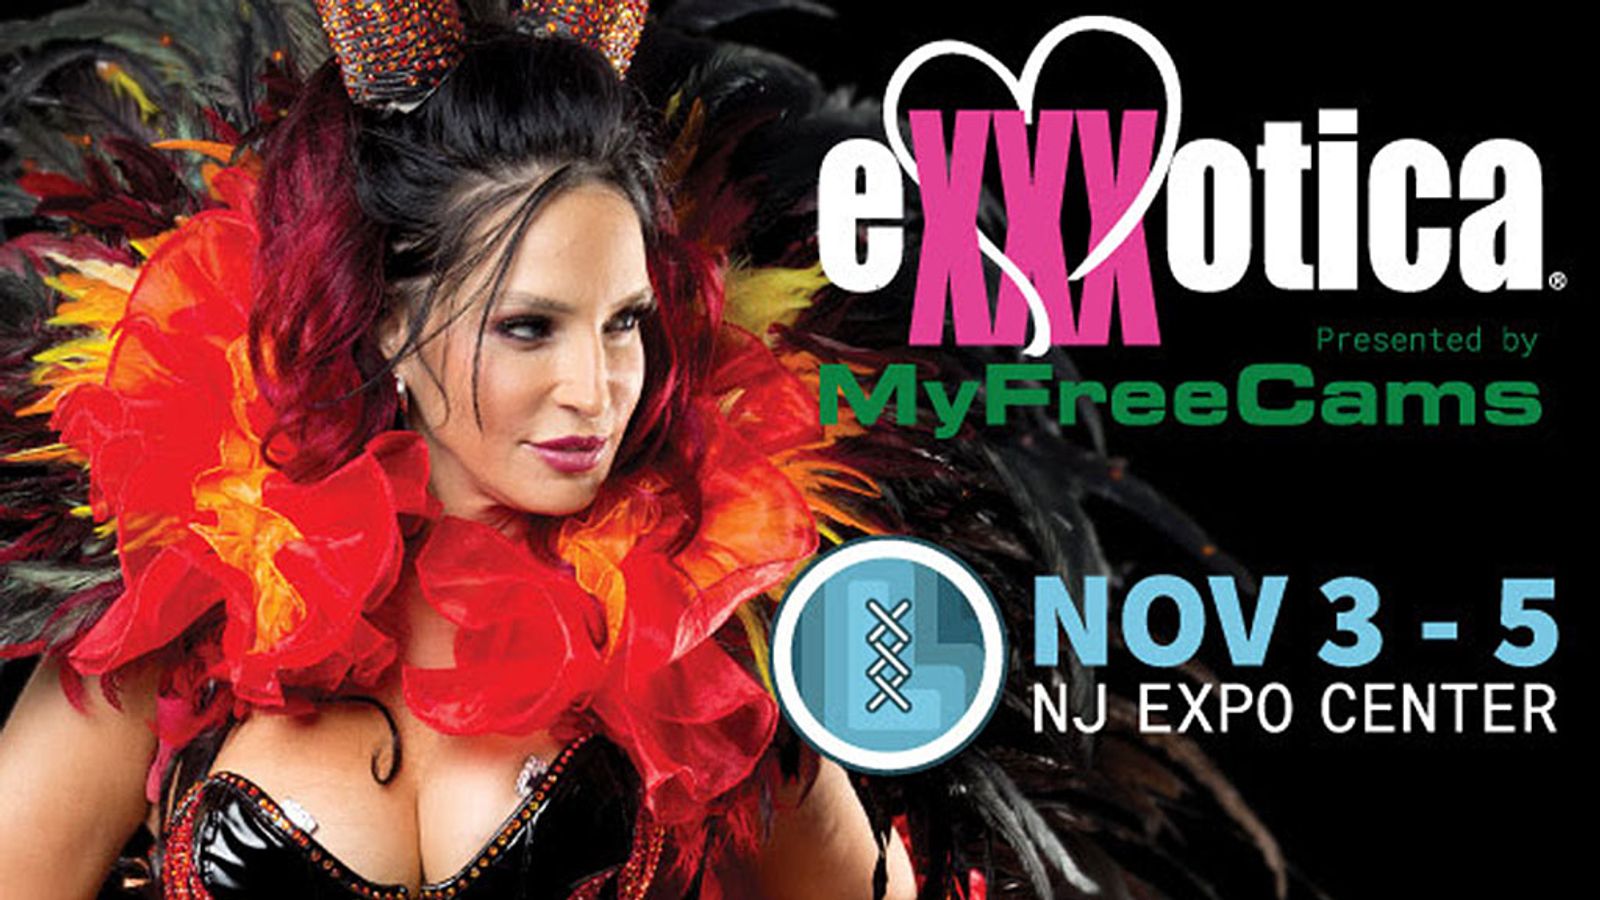 Exxxotica Expo Celebrating 10-Year Anniversary in NJ This Weekend